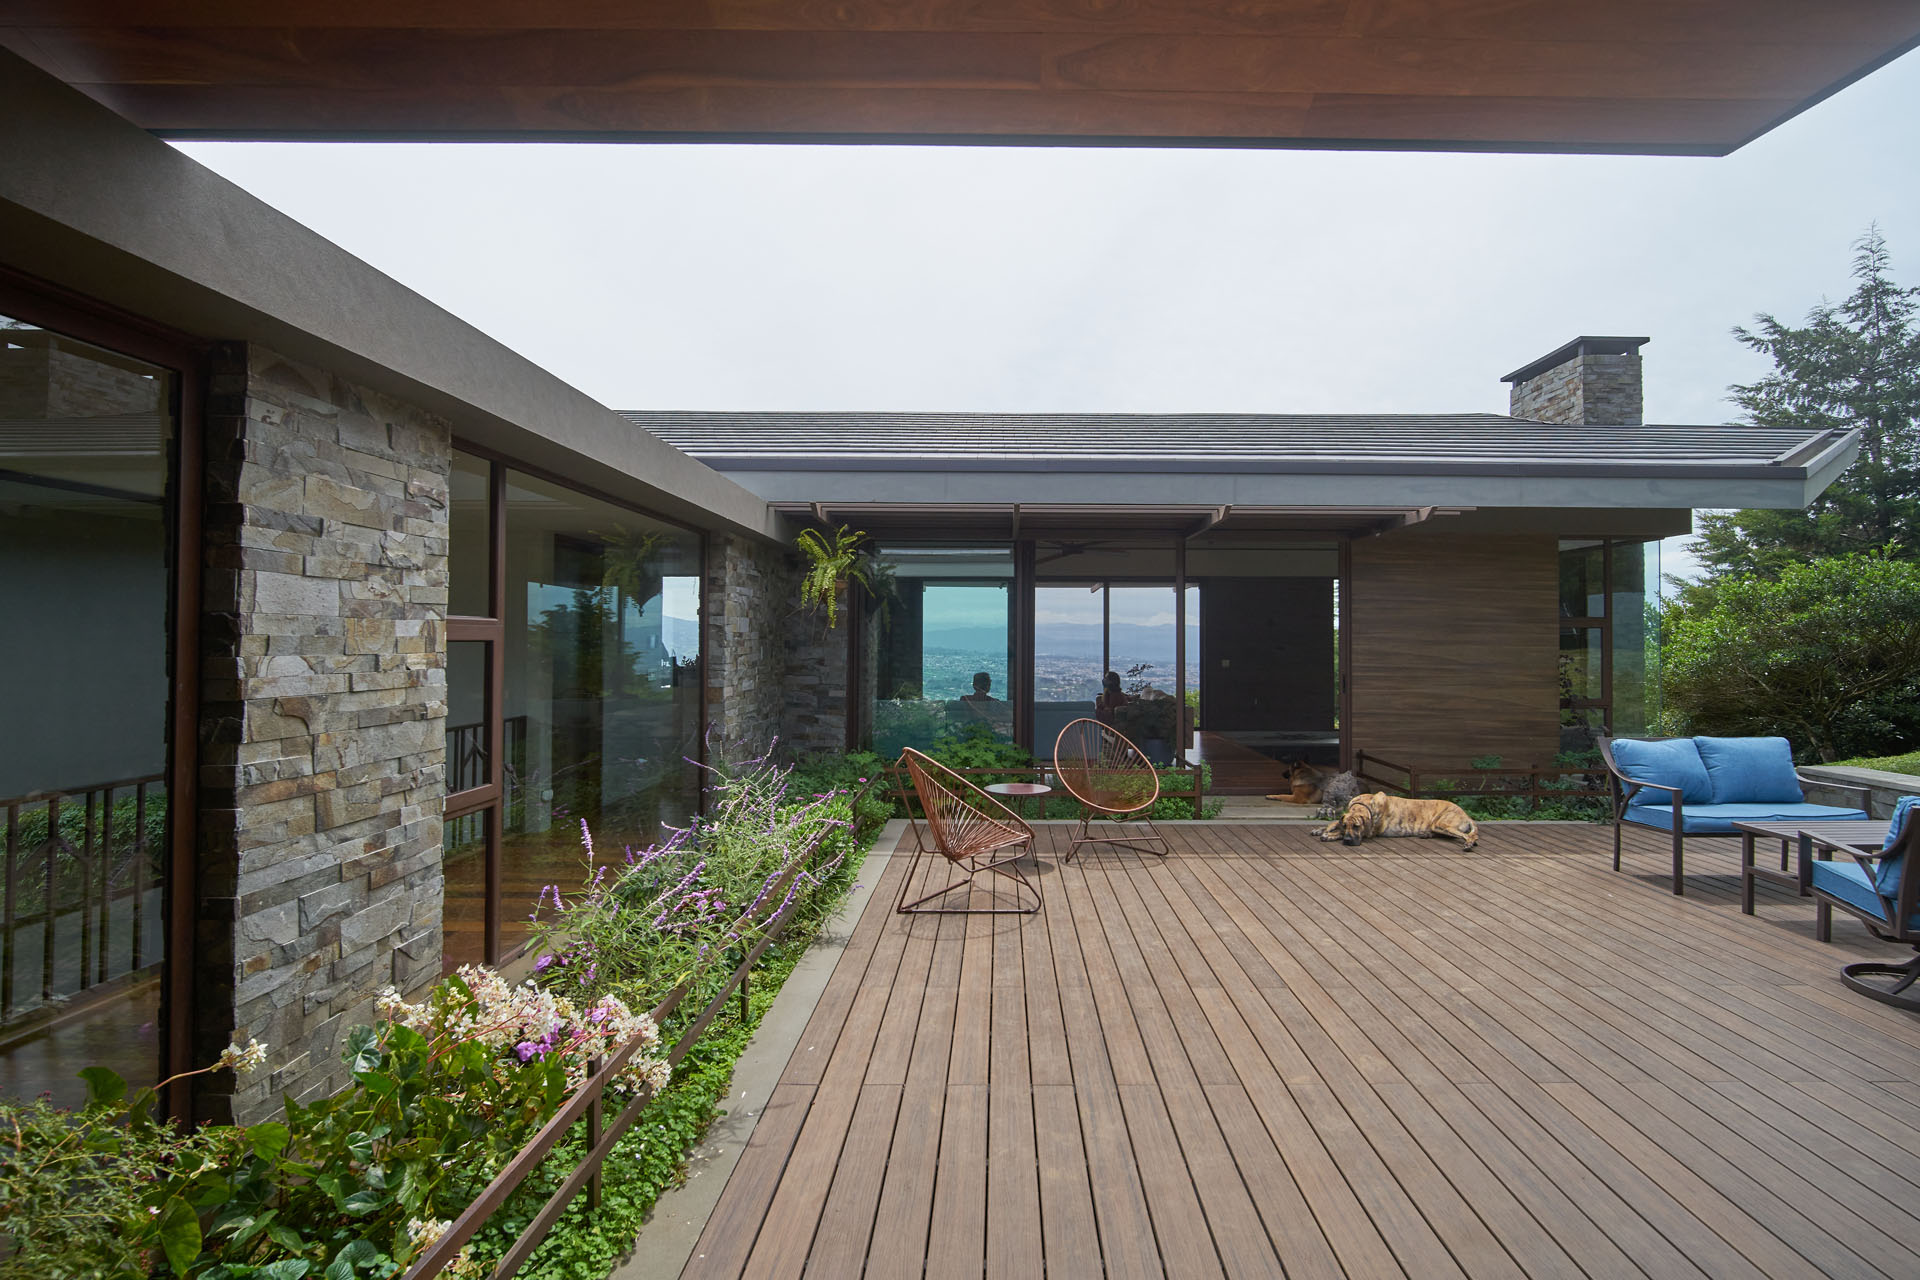 Outdoor deck at Musdan Estate enclosed by stone walls and operable glass.